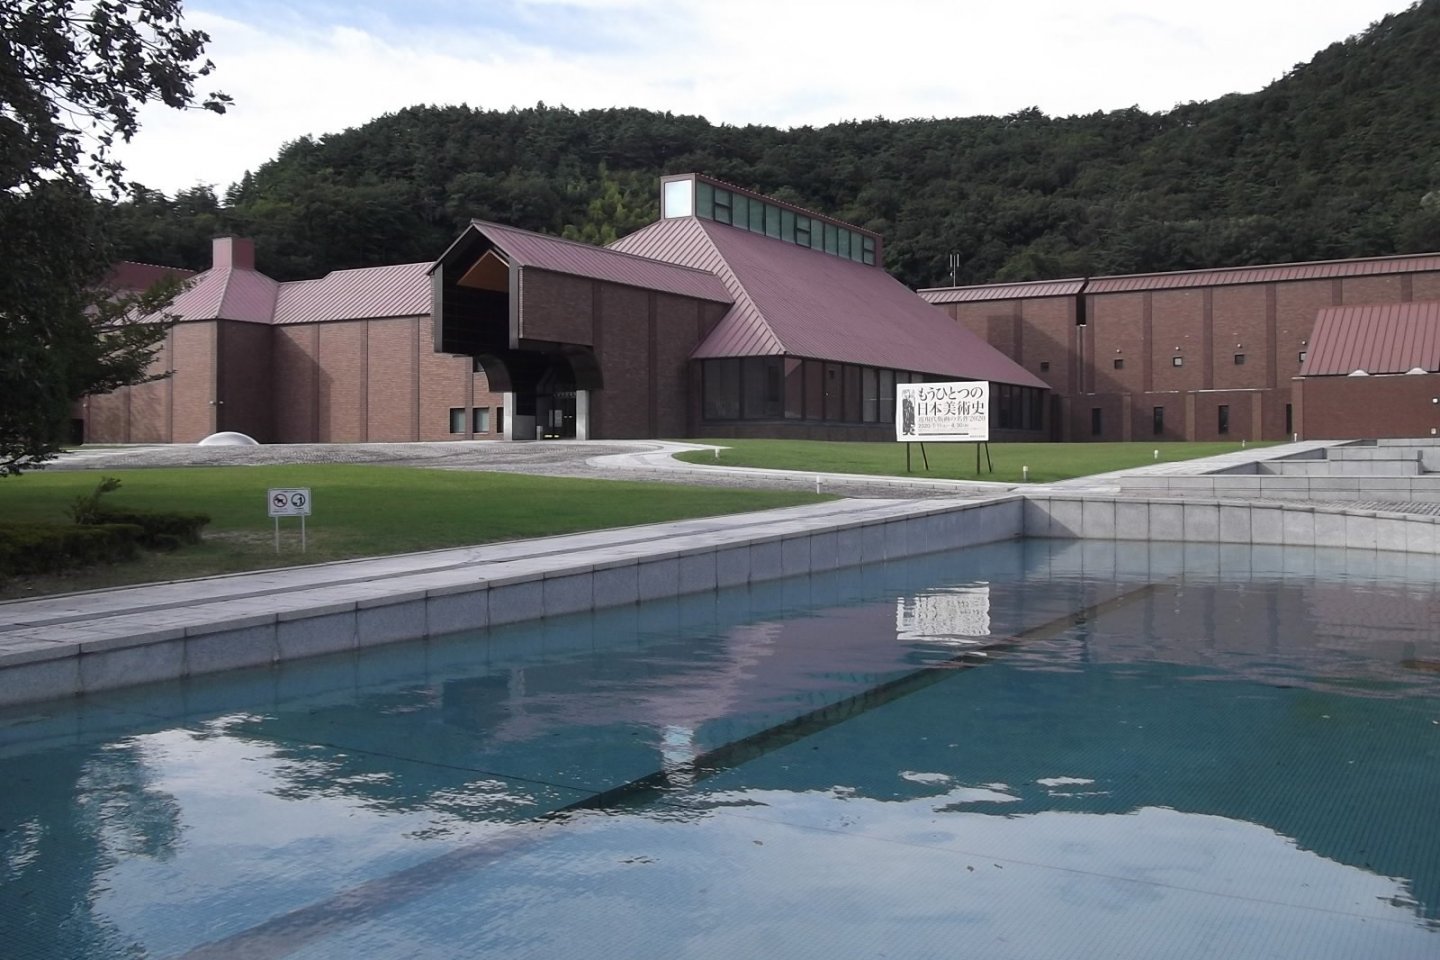 The water feature in front of the museum